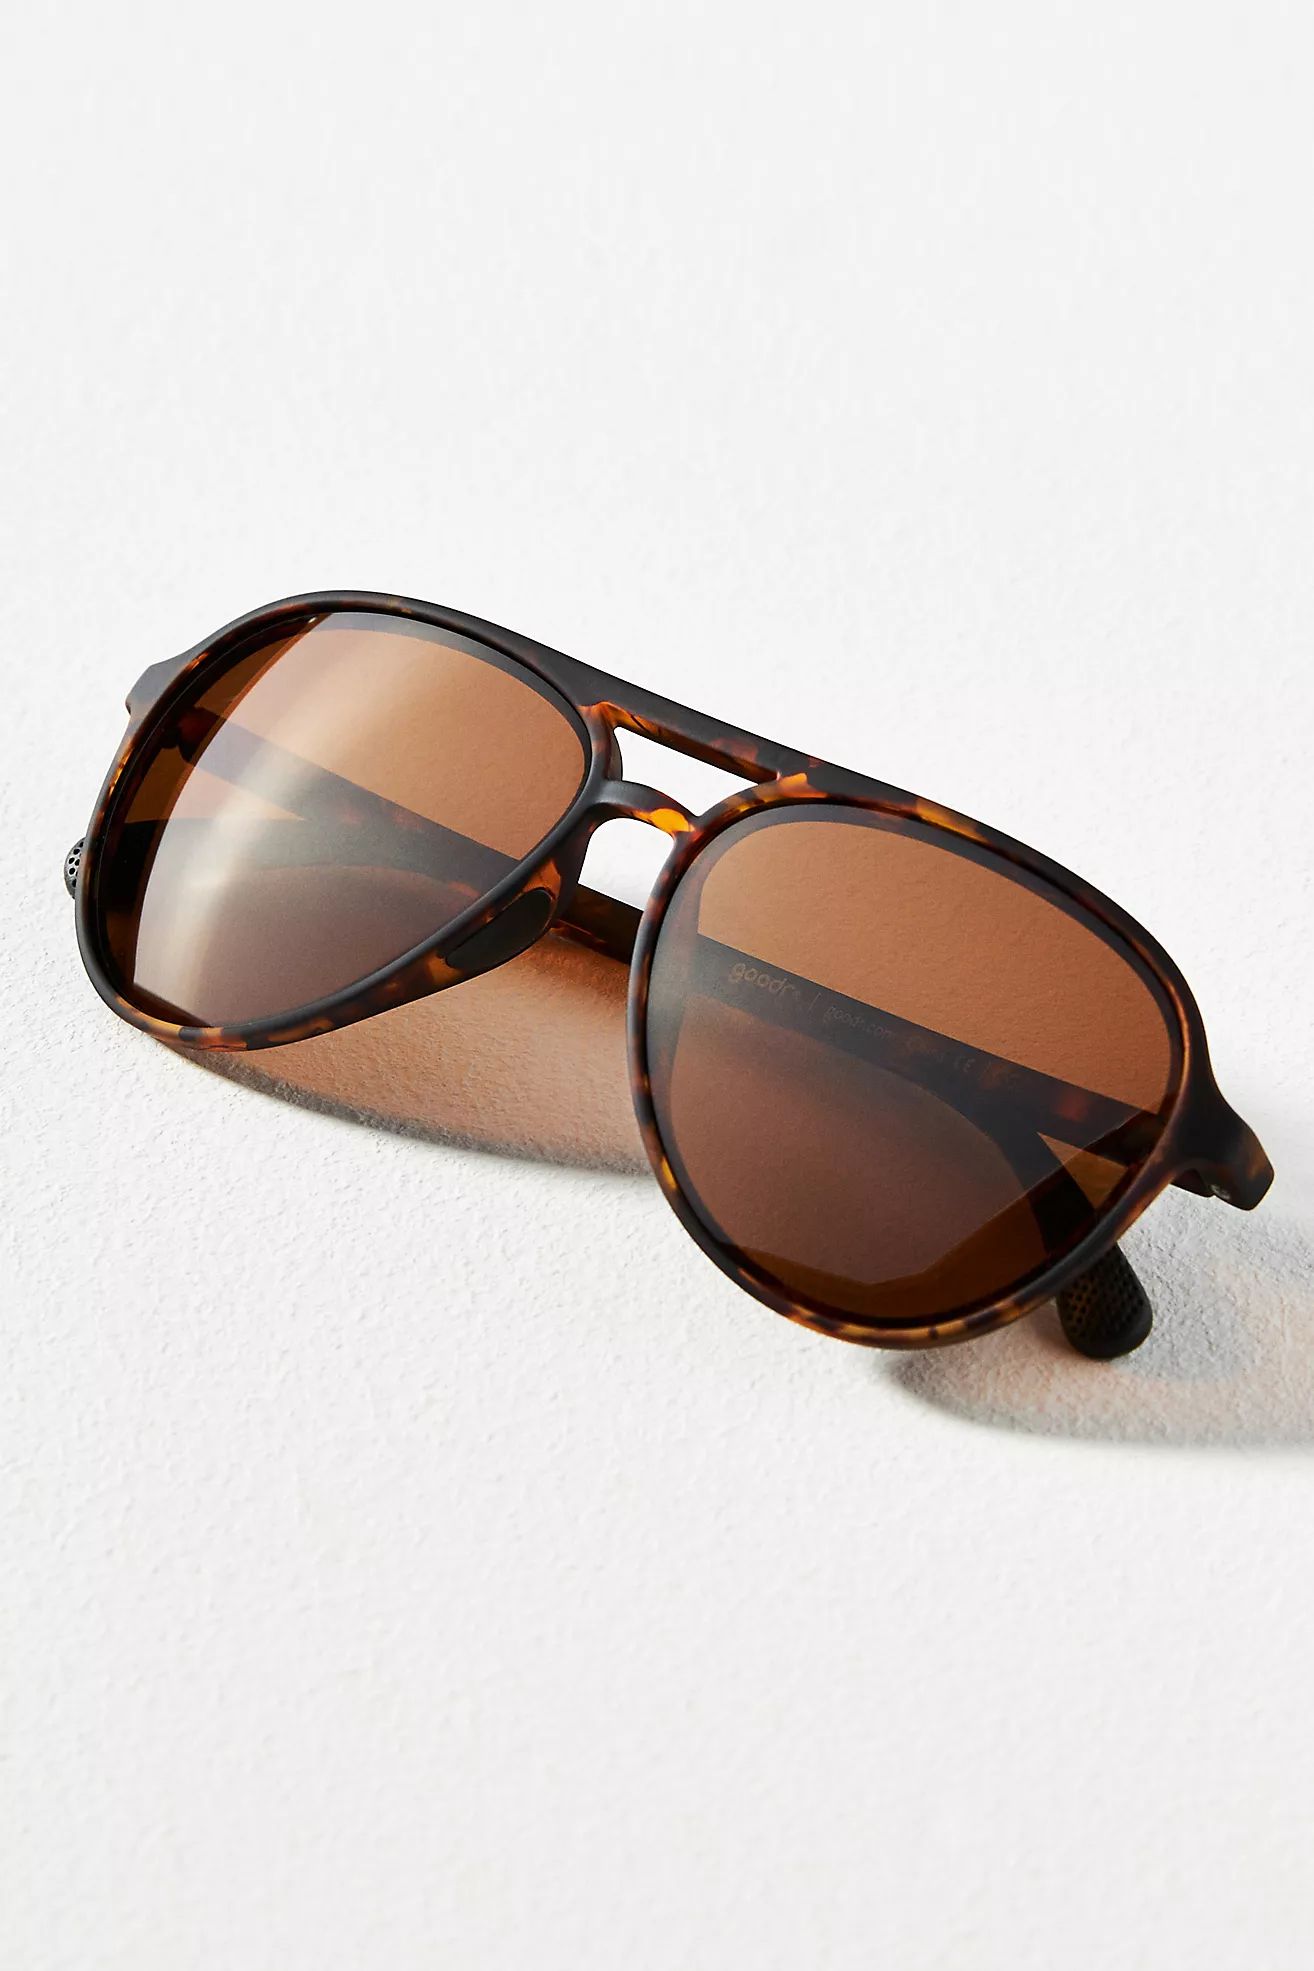 Goodr Amelia Earhart Ghosted Me Polarized Aviator Sunglasses | Anthropologie (US)